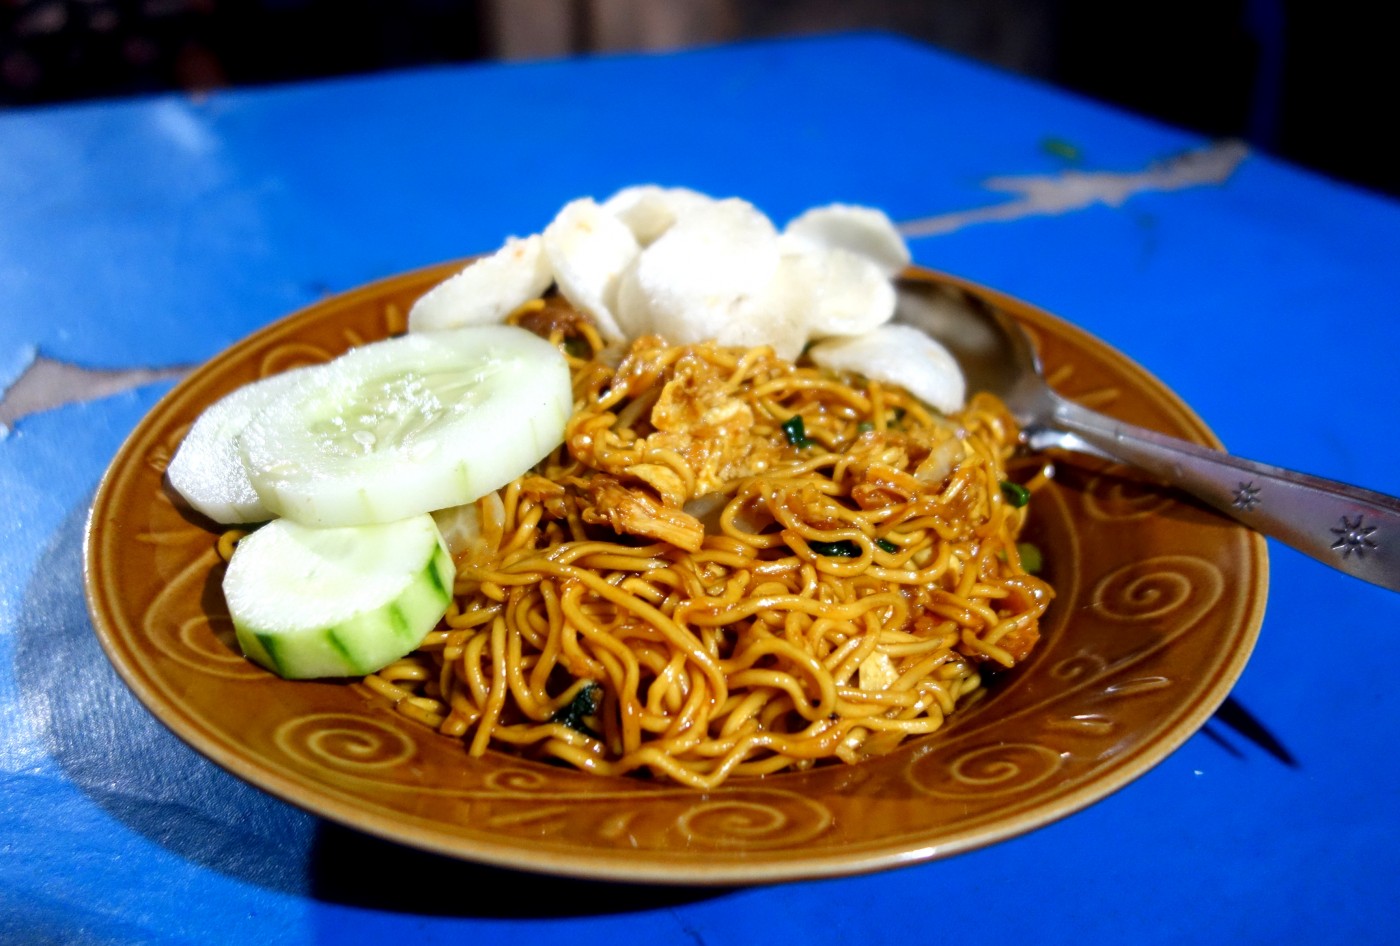 Mie goreng ayam - Fried noodles with chicken - Indonesia - Exotic